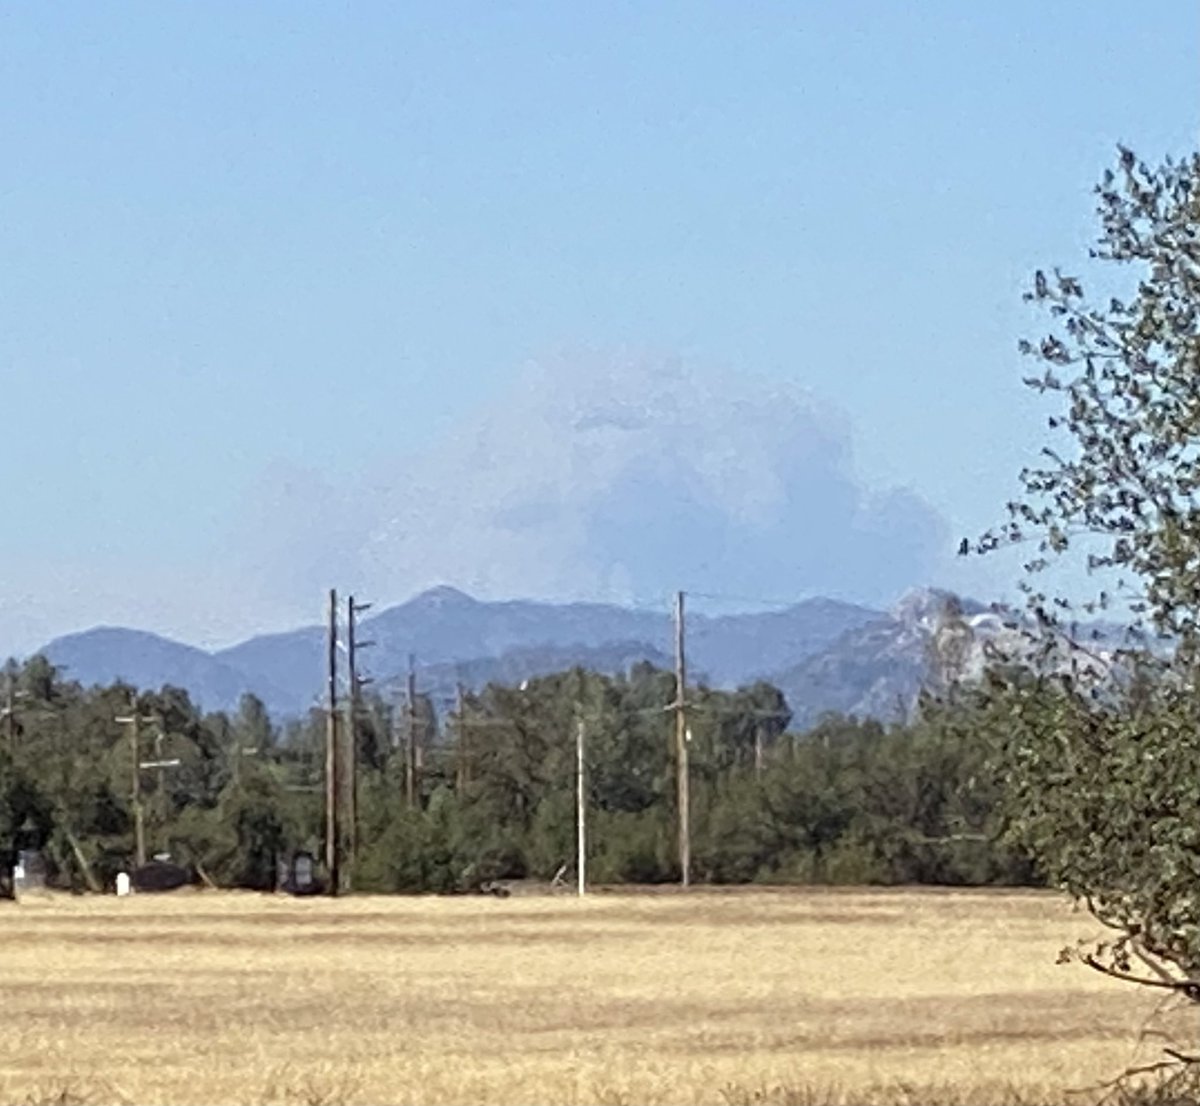 #MillFire #SiskiyouCounty from Redding air attack base... what a beast 🫤